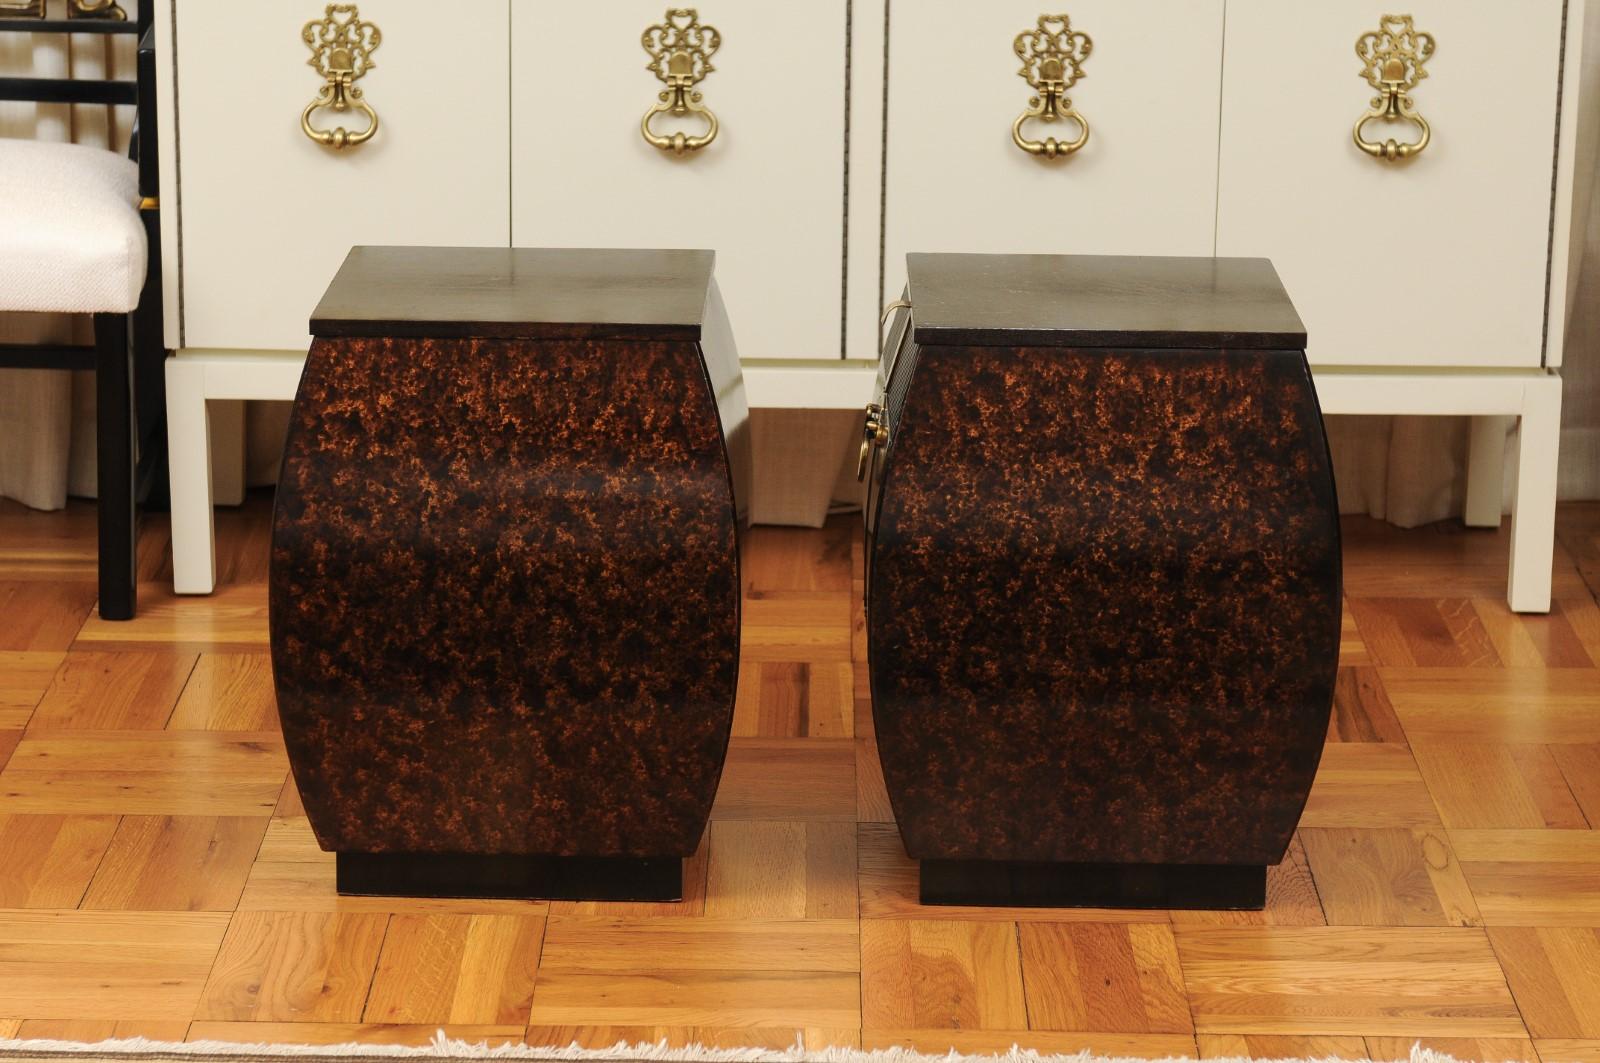 Exquisite Pair of Bombe Small Chests by Bert England for Widdicomb, circa 1965 For Sale 1